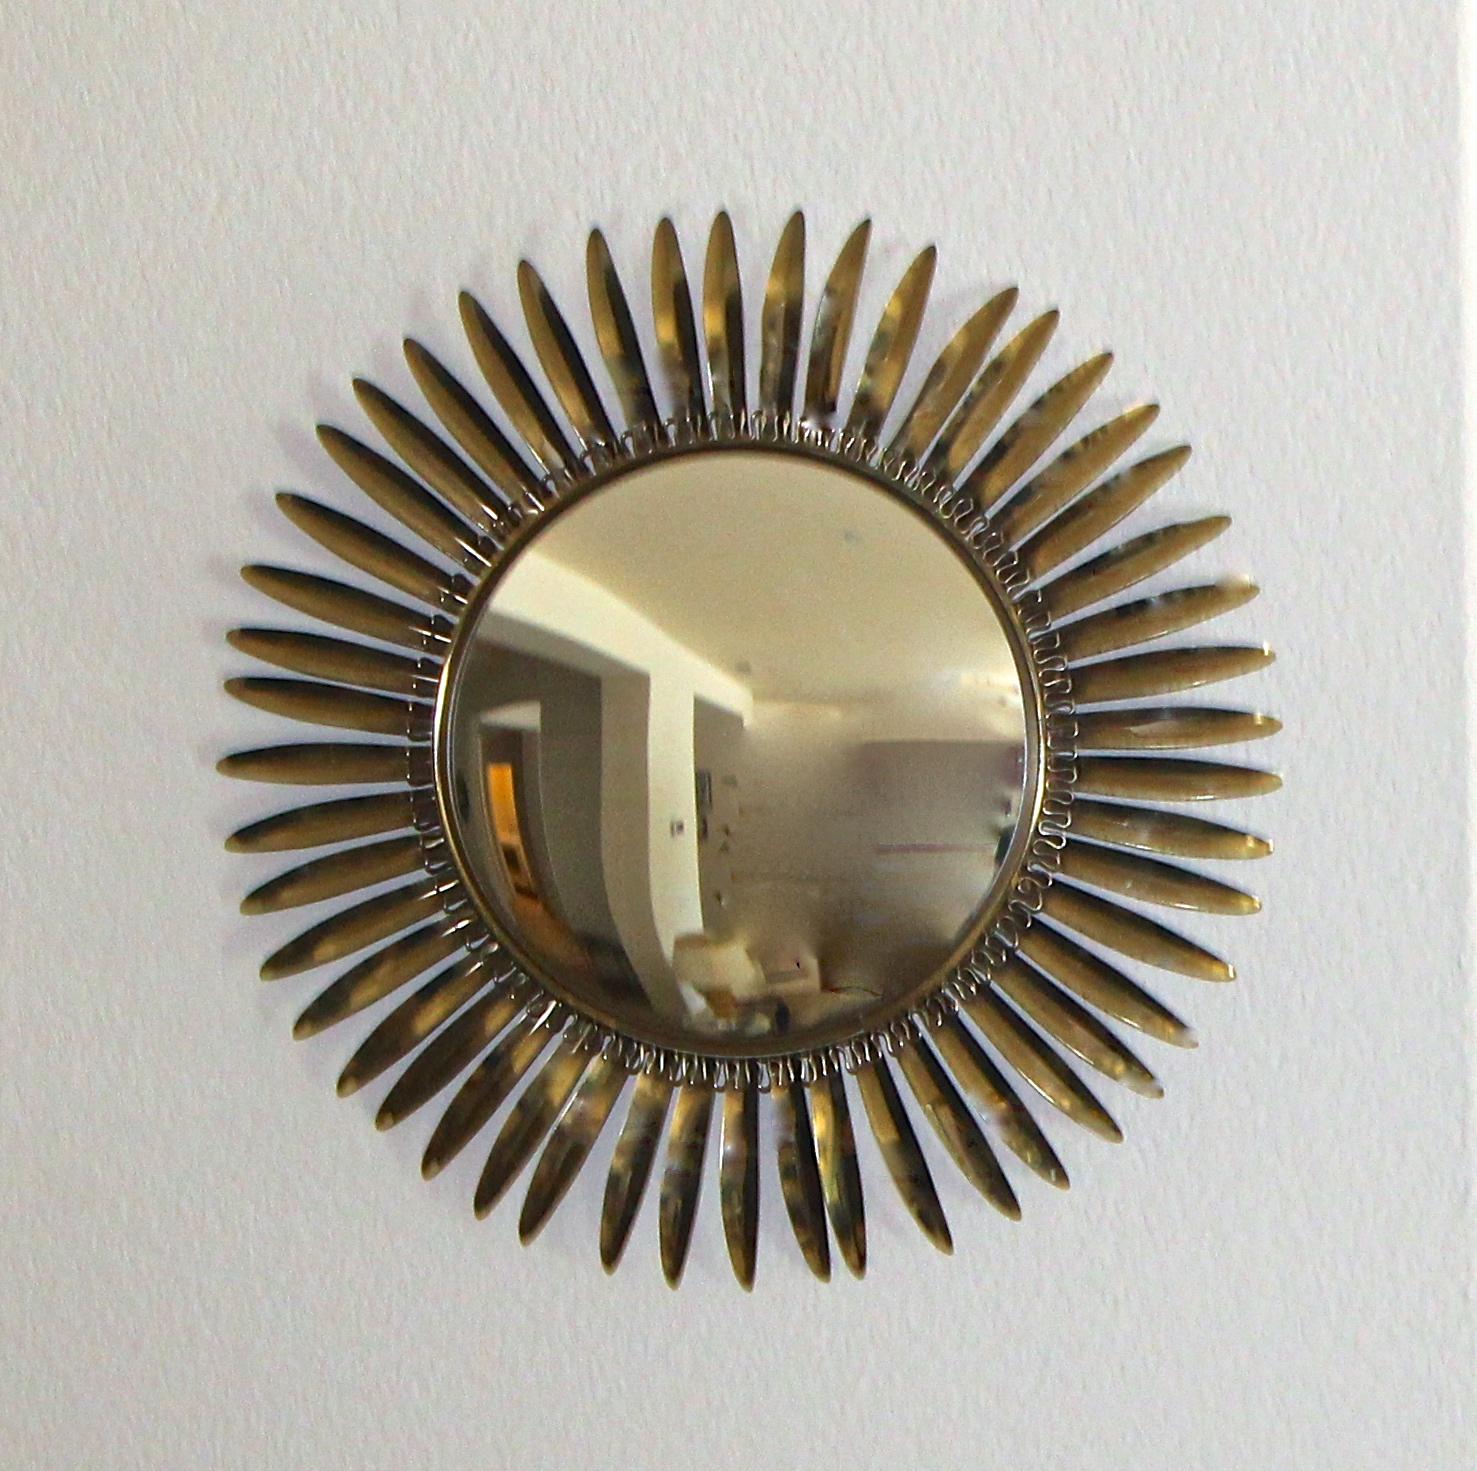 Plated French Brass Soleil or Sunburst Convex Wall Mirror